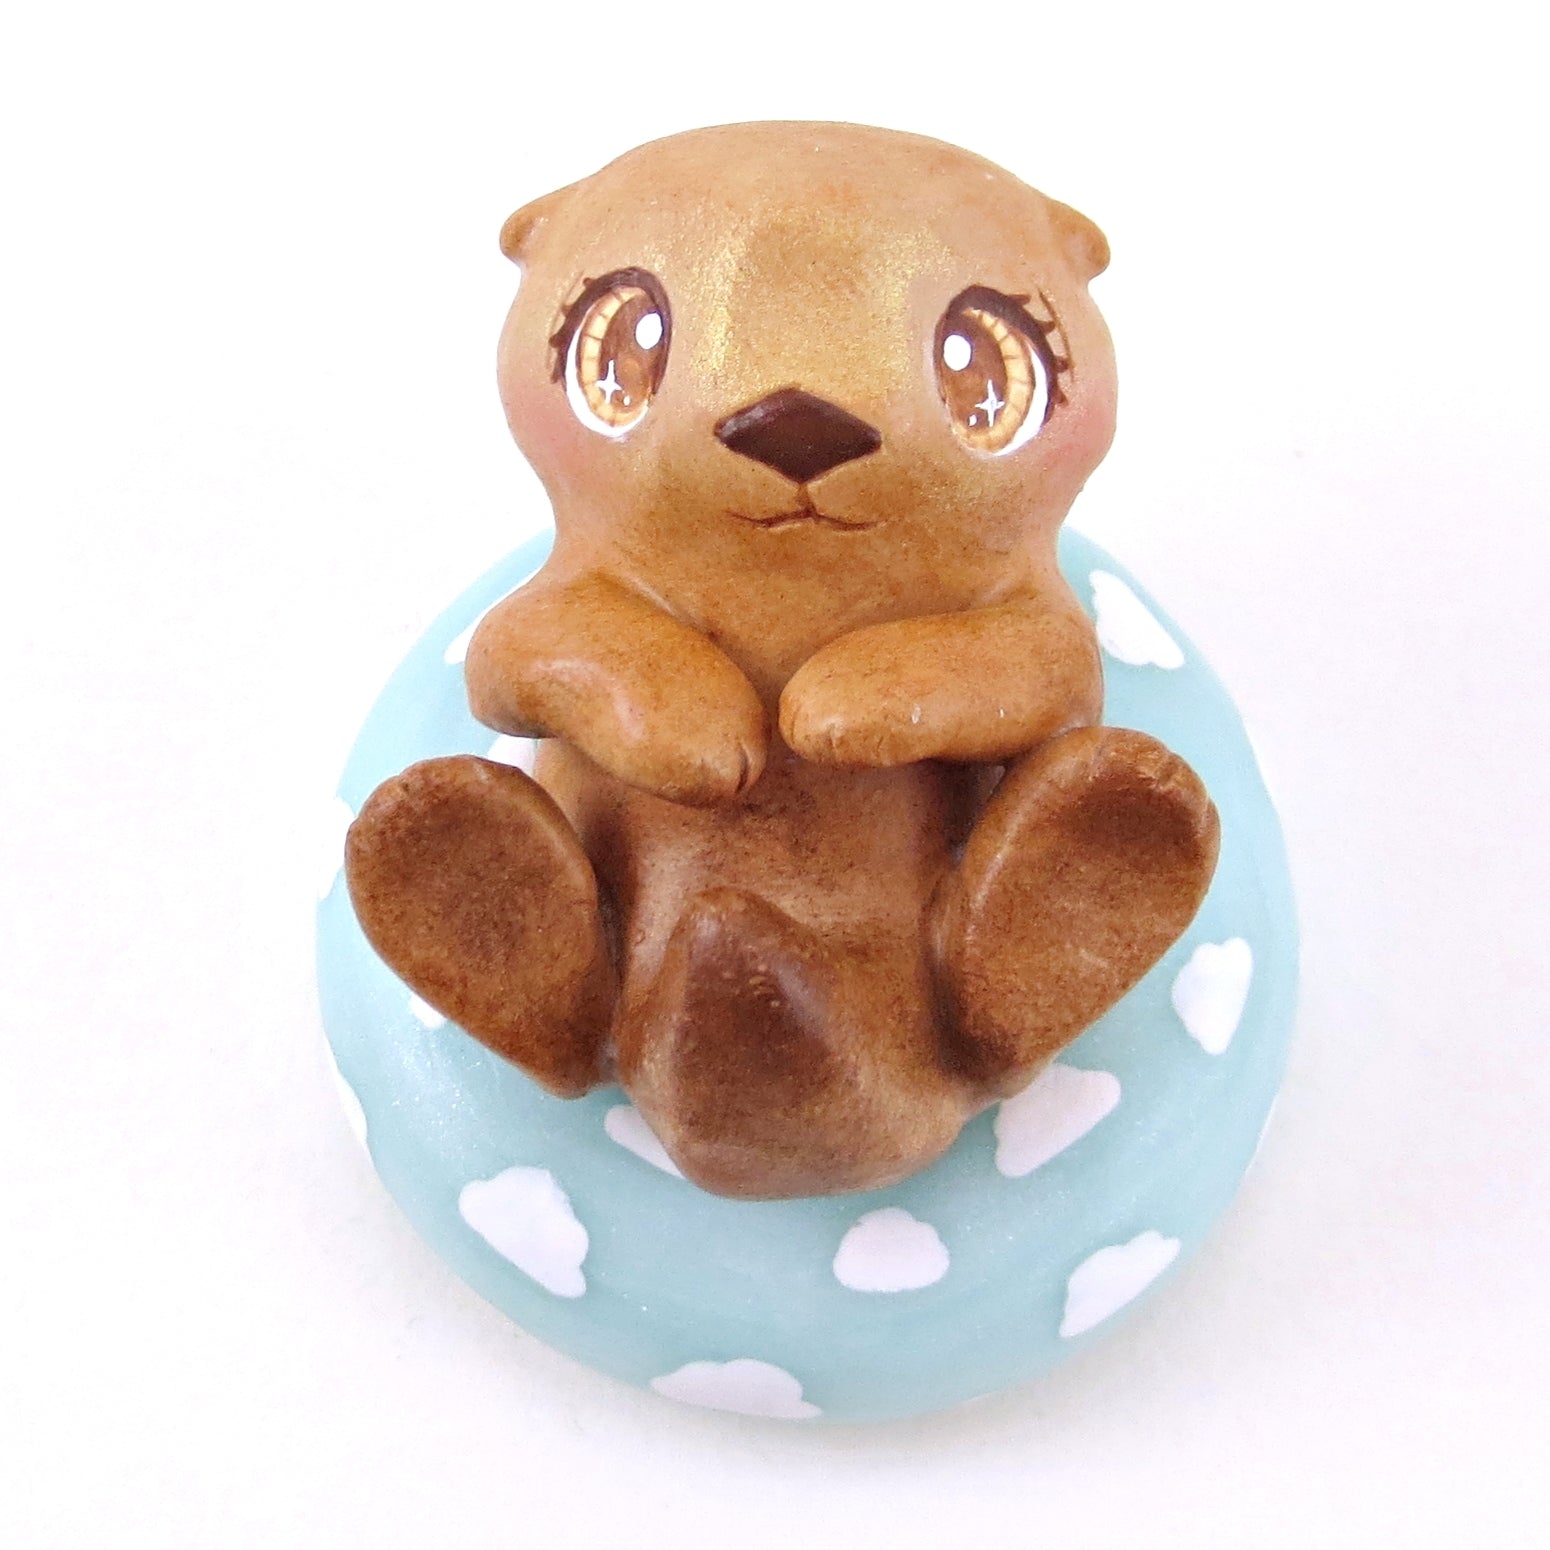 Otter in a Cloud Floatie Figurine - Polymer Clay Animals Pool Party Collection